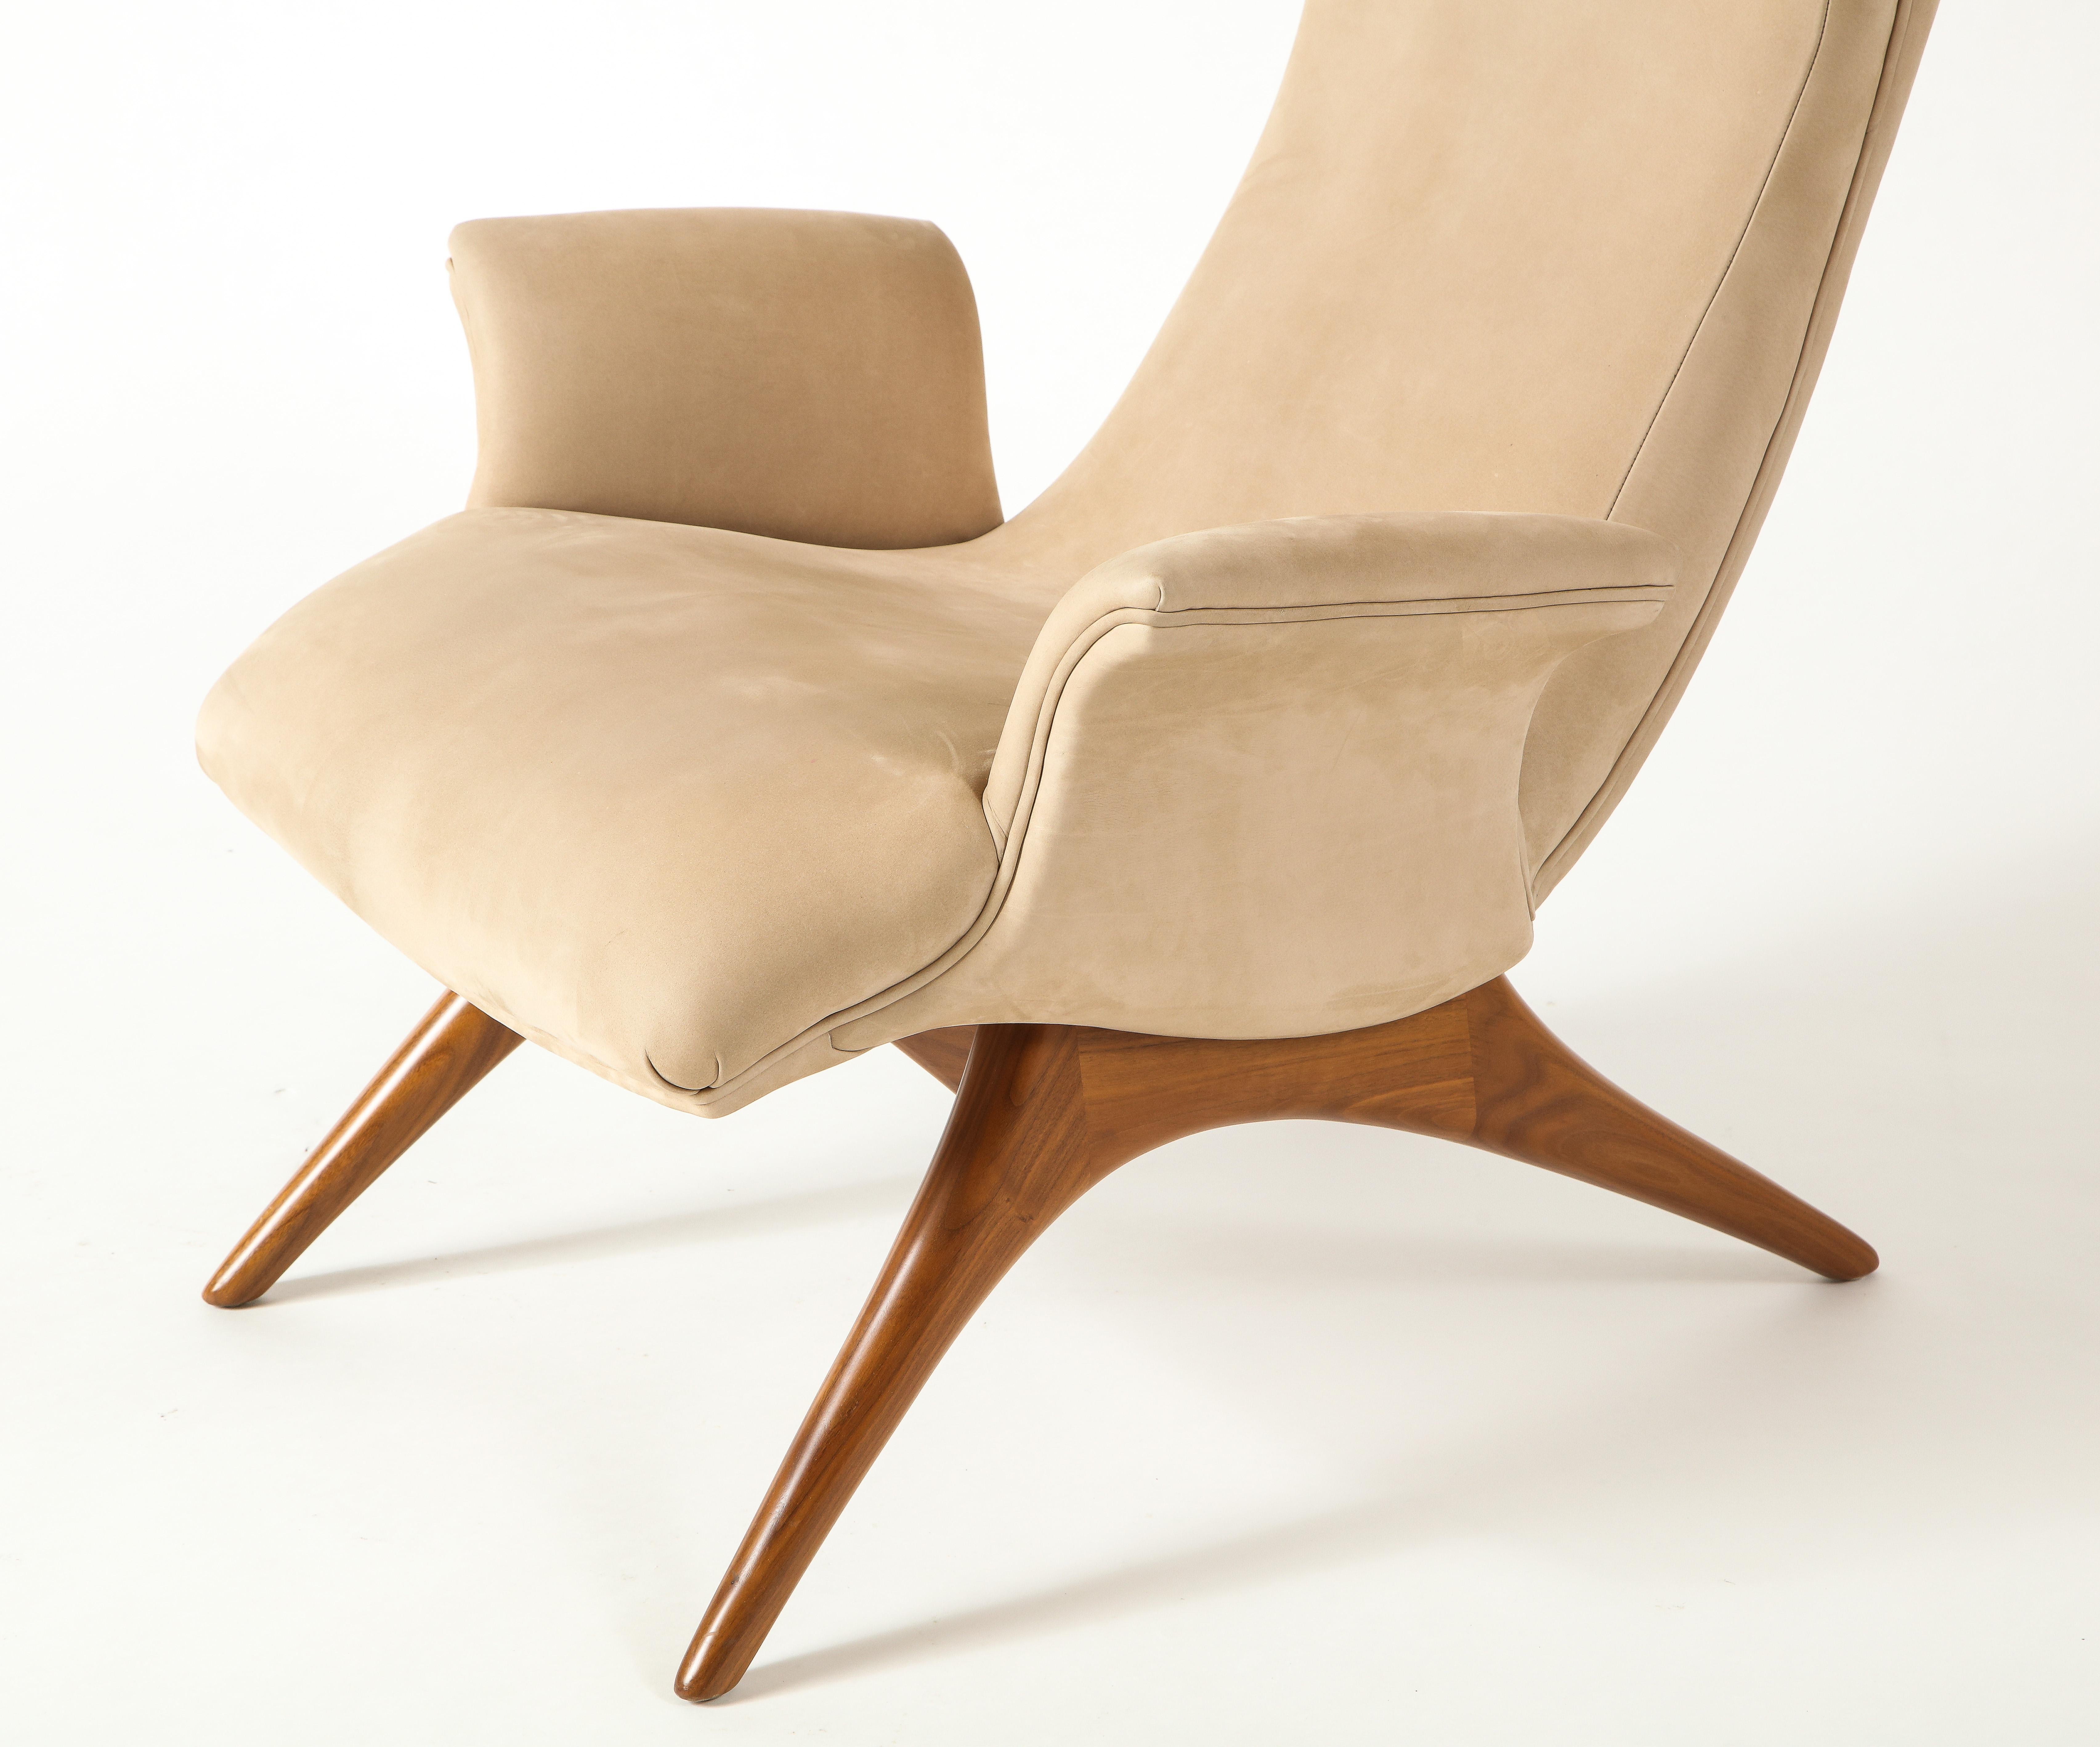 American Vladimir Kagan Ondine Chair with Sueded Leather Upholstery & Natural Walnut Base